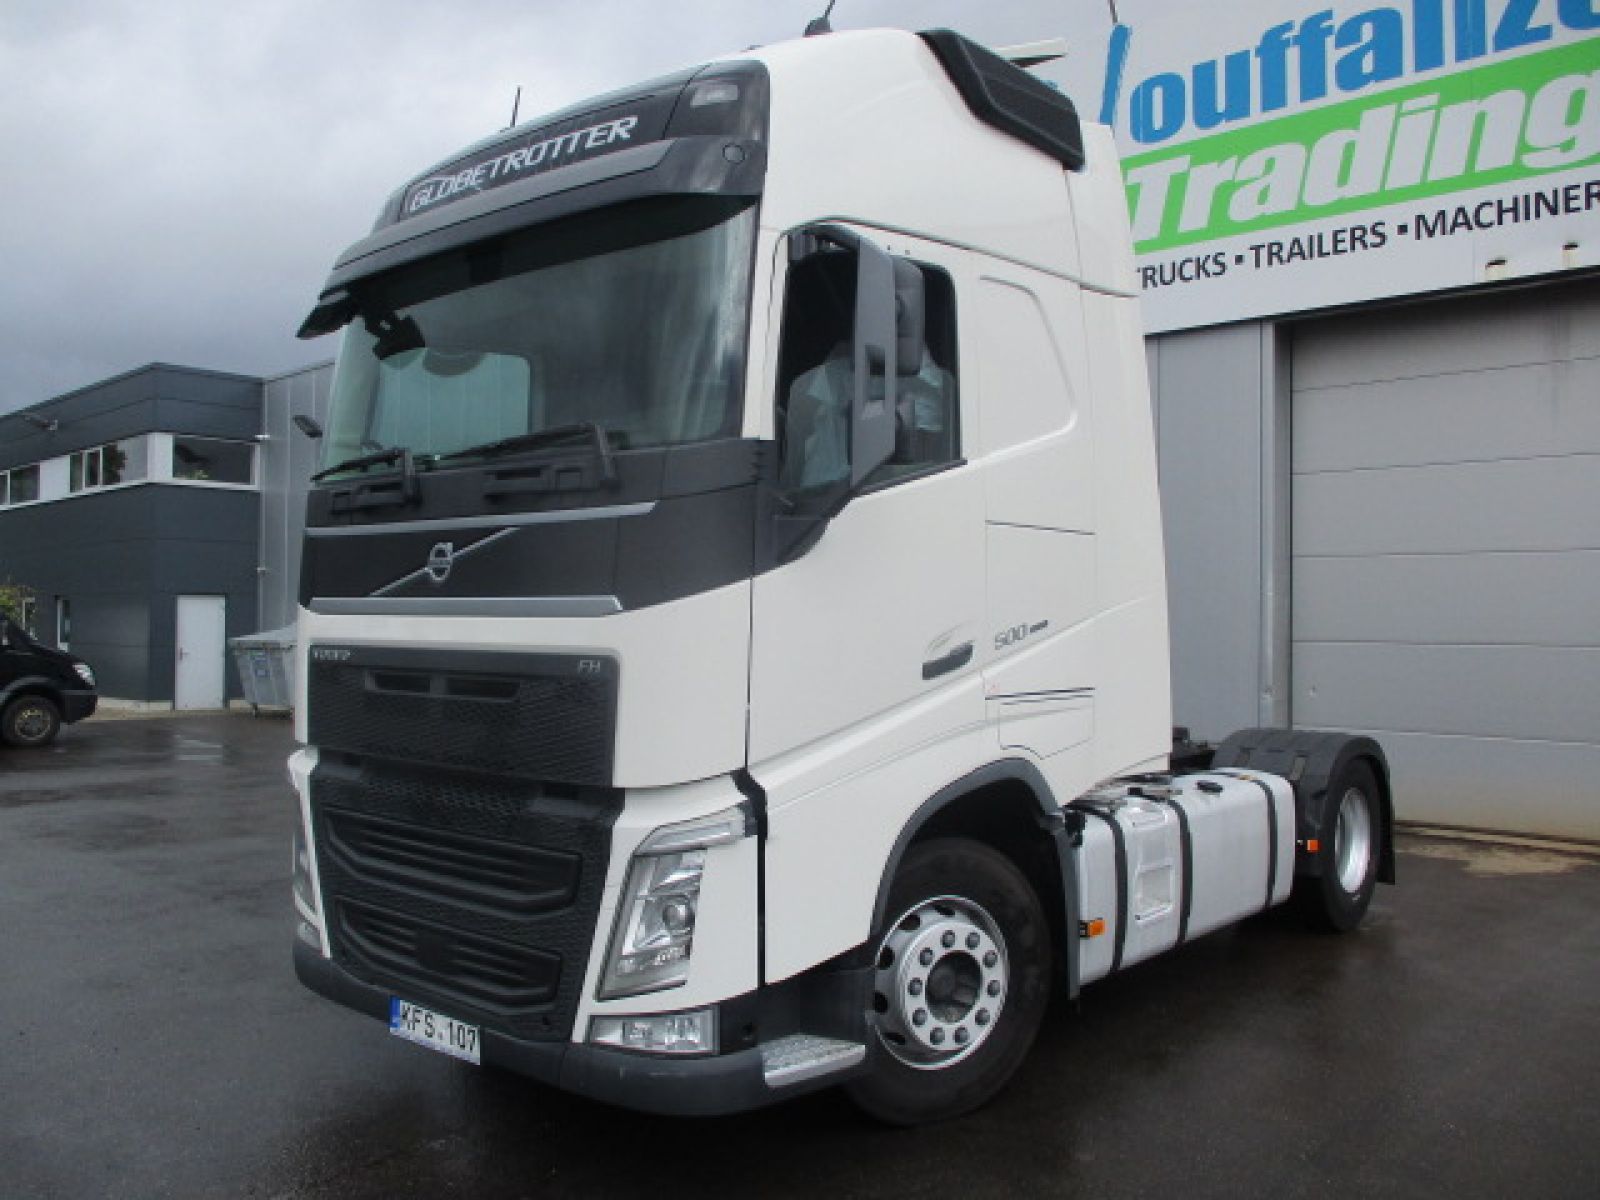 Vente occasion Tracteur - VOLVO FH 500  TRACTEUR (Belgique - Europe) - Houffalize Trading s.a.